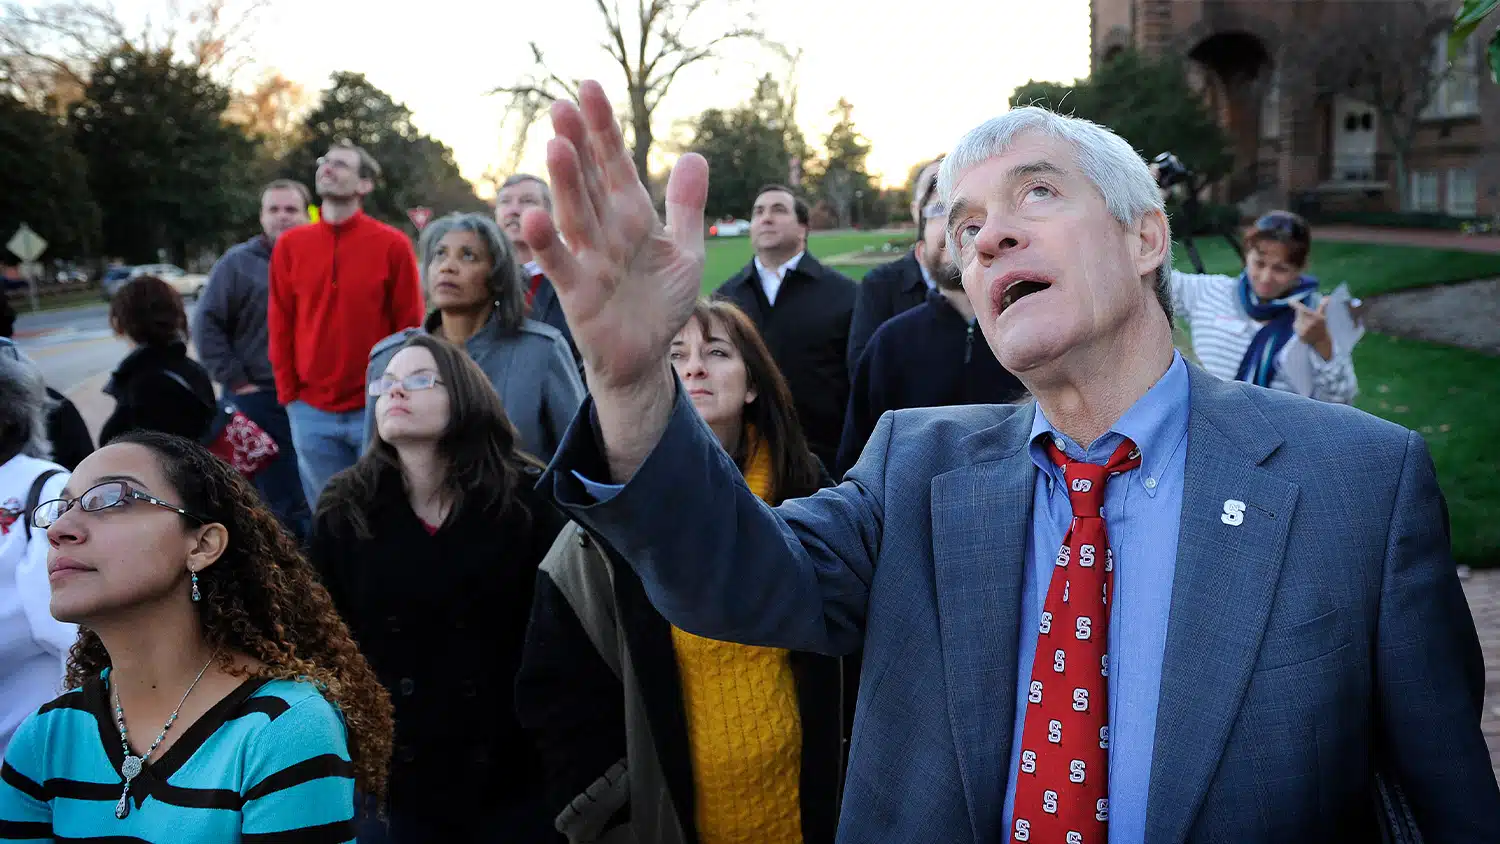 Tom Stafford, vice chancellor for student affairs emeritus, gives a tour of NC State’s Memorial Belltower.